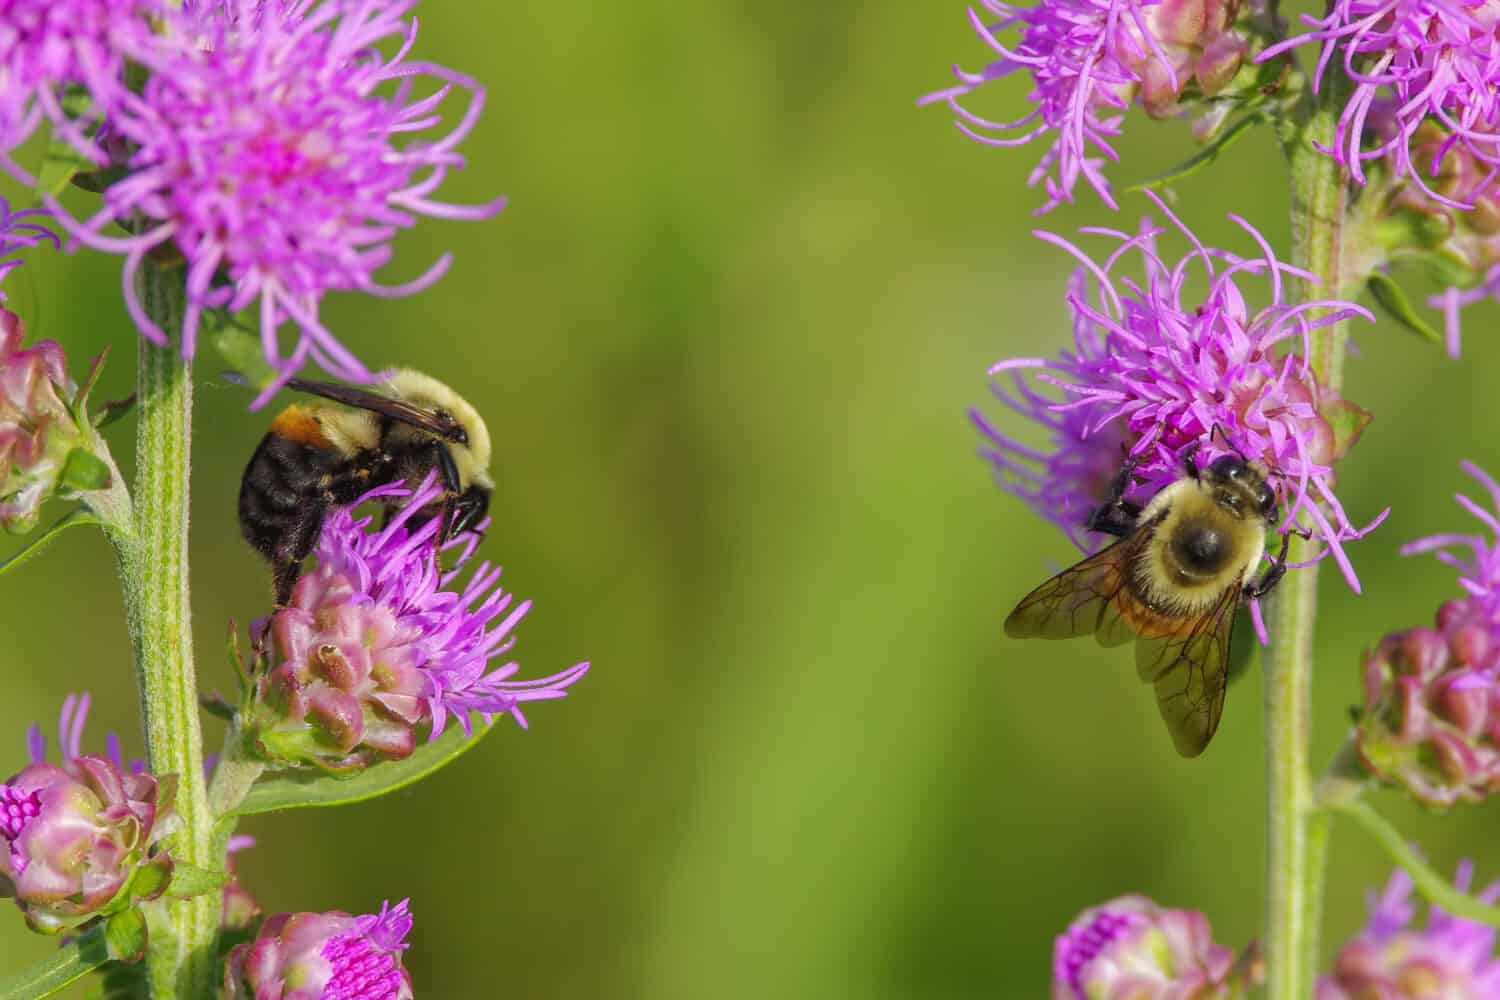 Furry cute bumble bees feeding and pollinating on what I believe is a purple rough blazing star flower - smooth green background - in Crex Meadows Wildlife Area in Northern Wisconsin